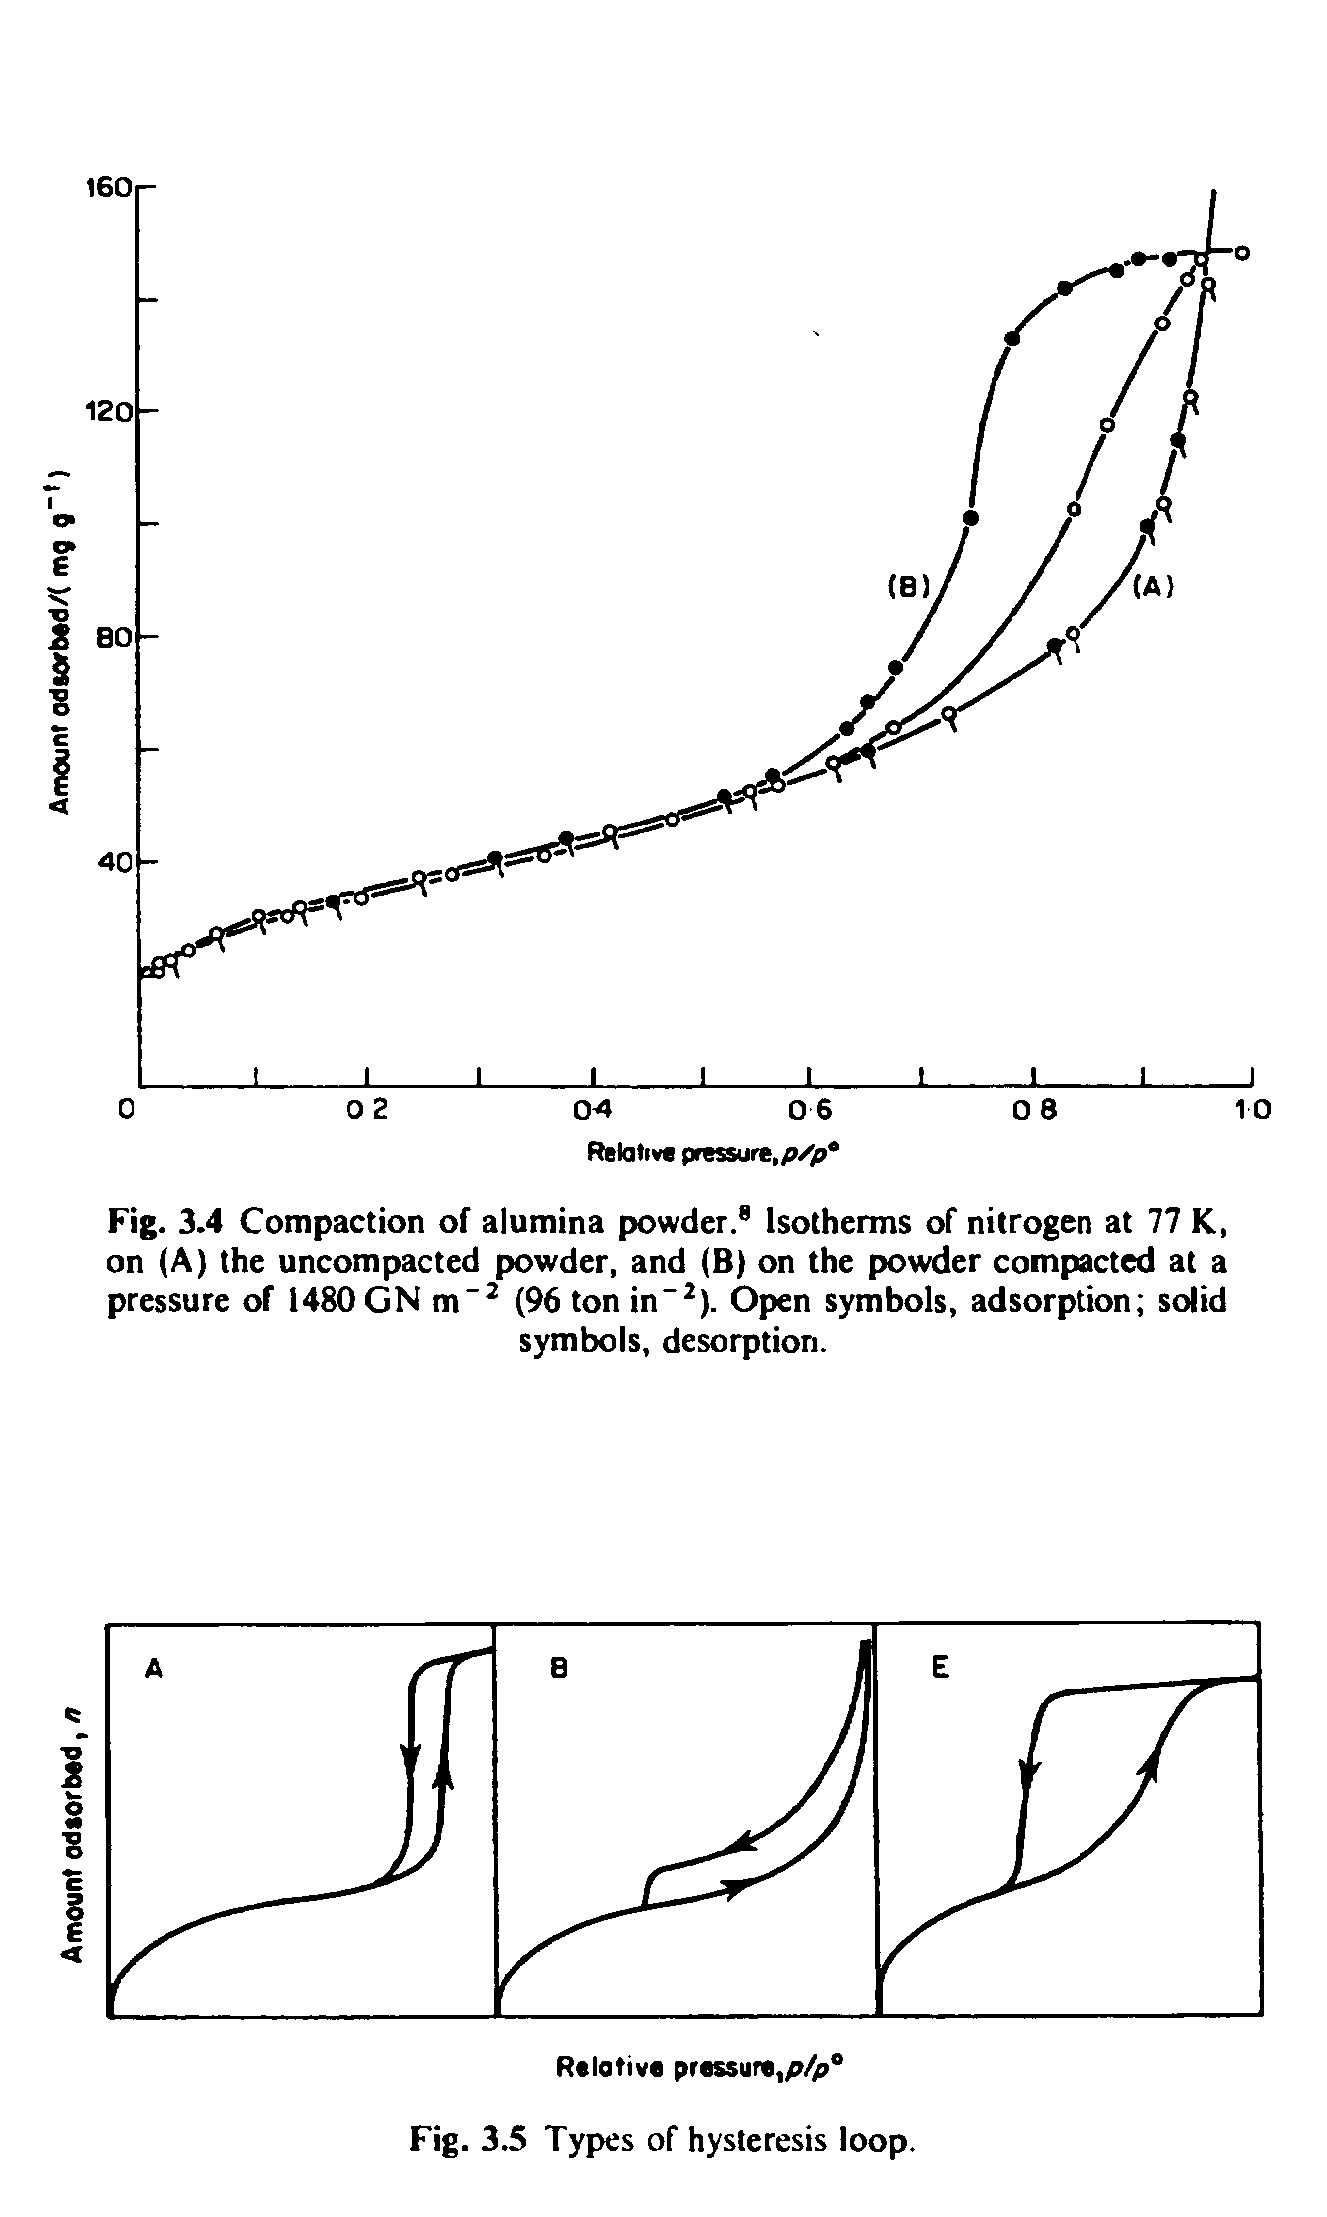 Fig. 3.4 Compaction of alumina powder. Isotherms of nitrogen at 77 K, on (A) the uncompacted powder, and (B) on the powder compacted at a pressure of 1480 GN (96 ton in" ). Open symbols, adsorption solid symbols, desorption.